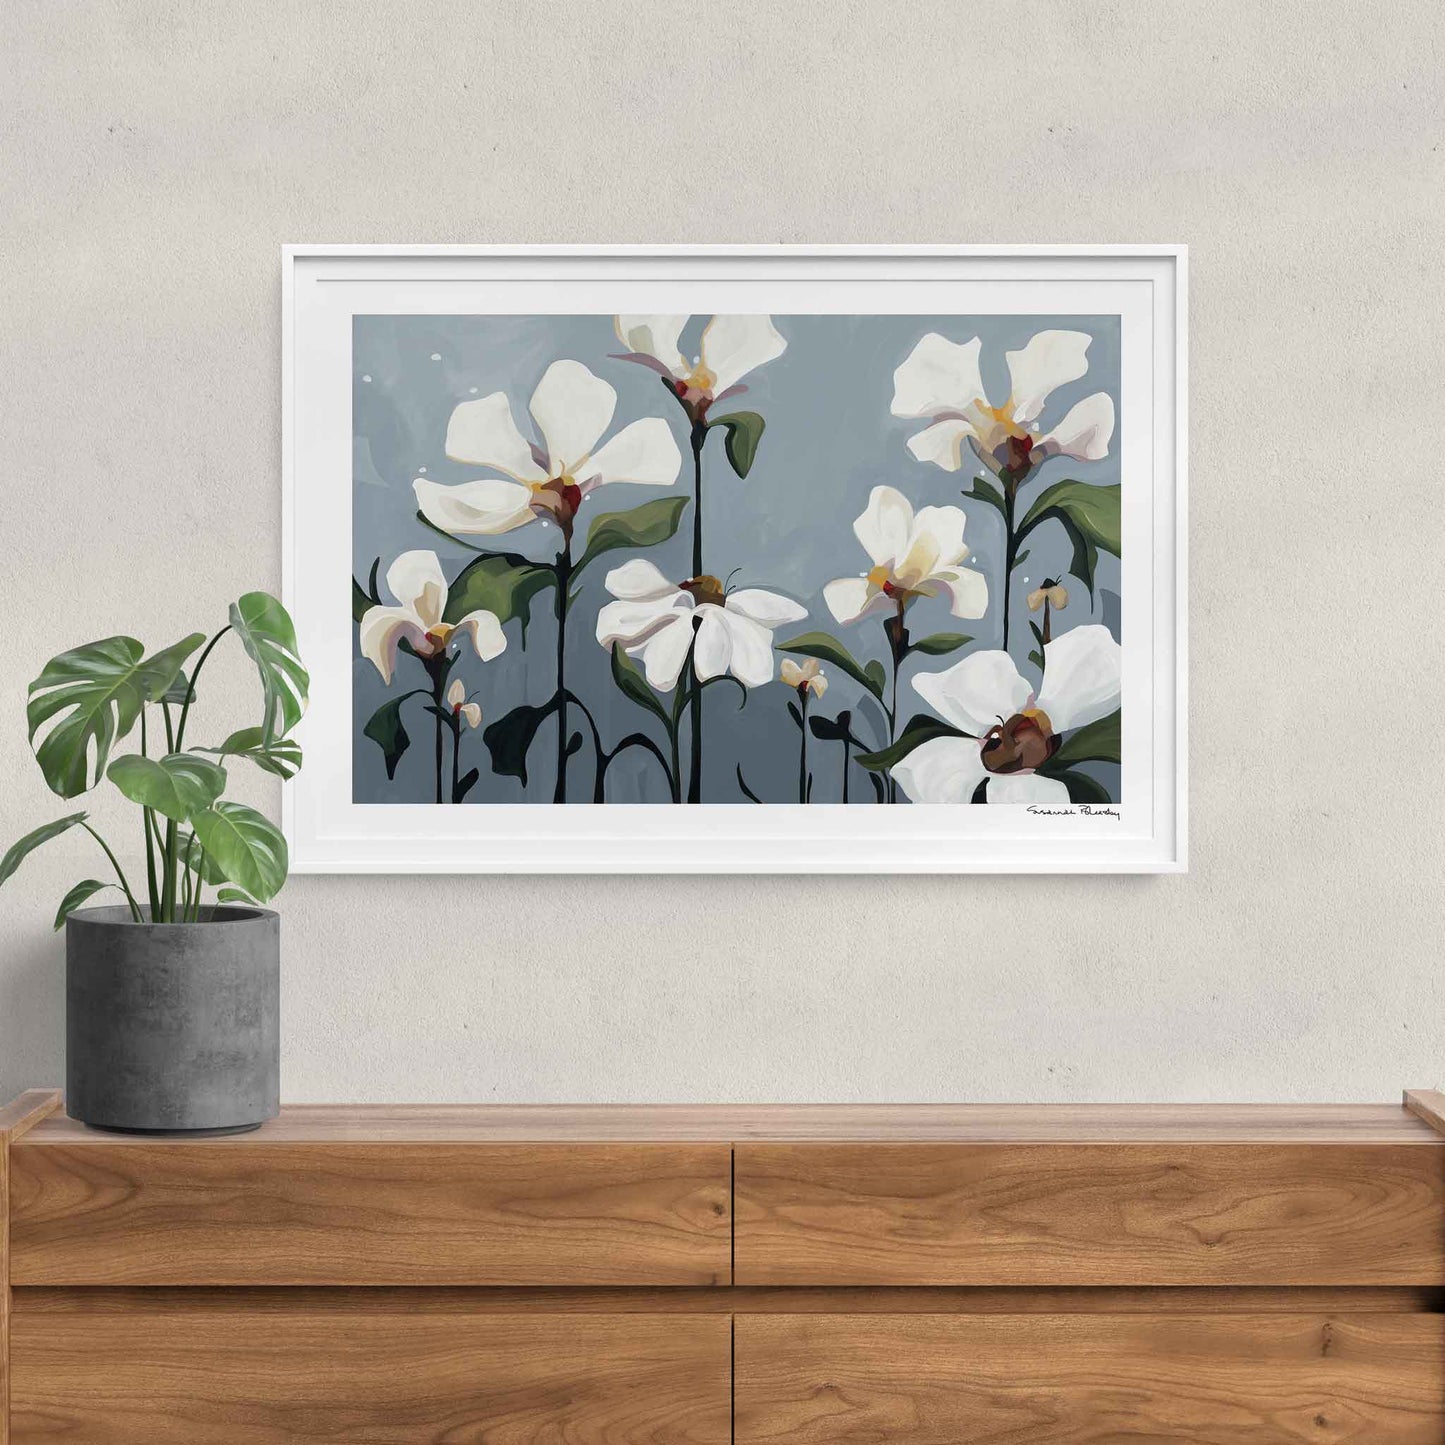 Acrylic flower painting print with creamy white flowers framed as wall art hanging over bedroom dresser